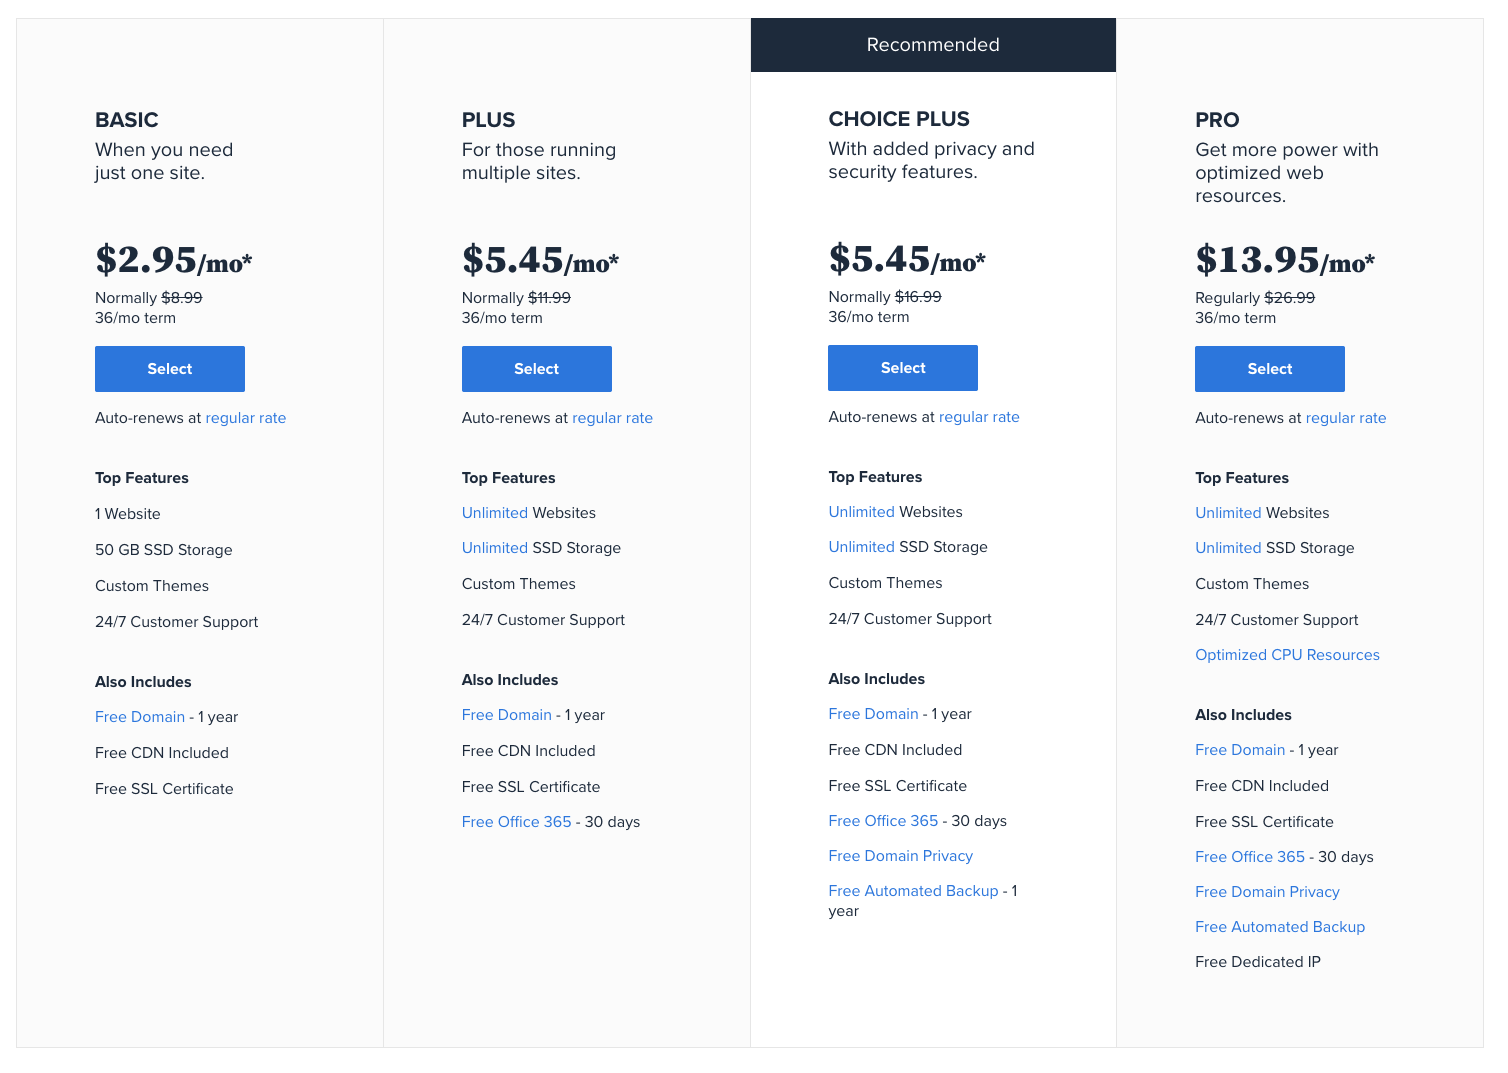 Bluehost pricing